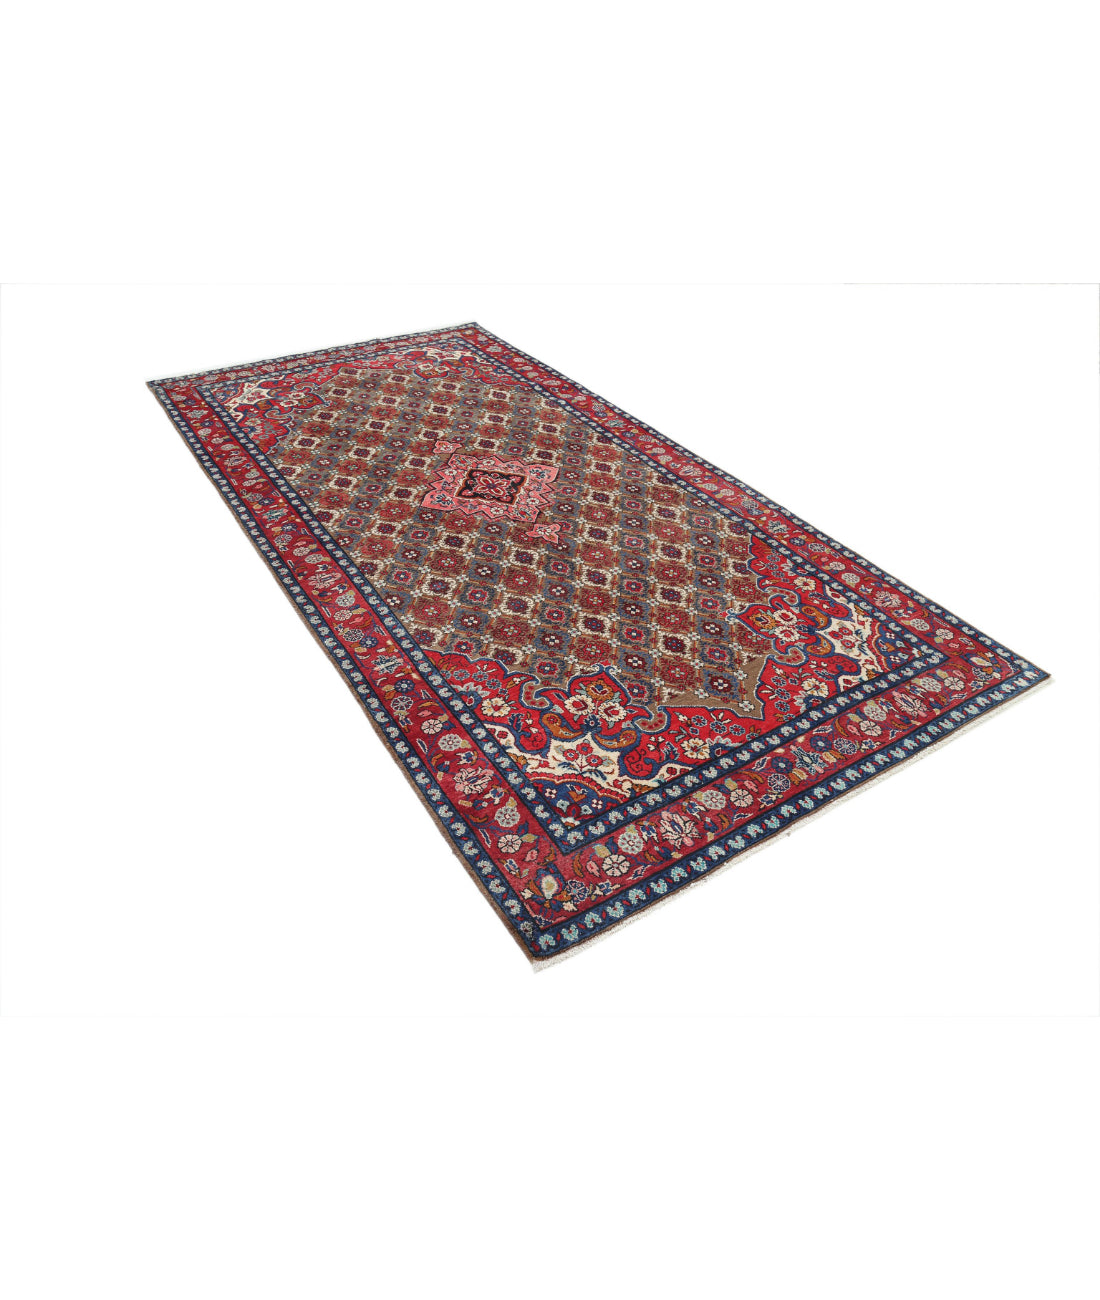 Bijar 5'1'' X 10'2'' Hand-Knotted Wool Rug 5'1'' x 10'2'' (153 X 305) / Taupe / Red